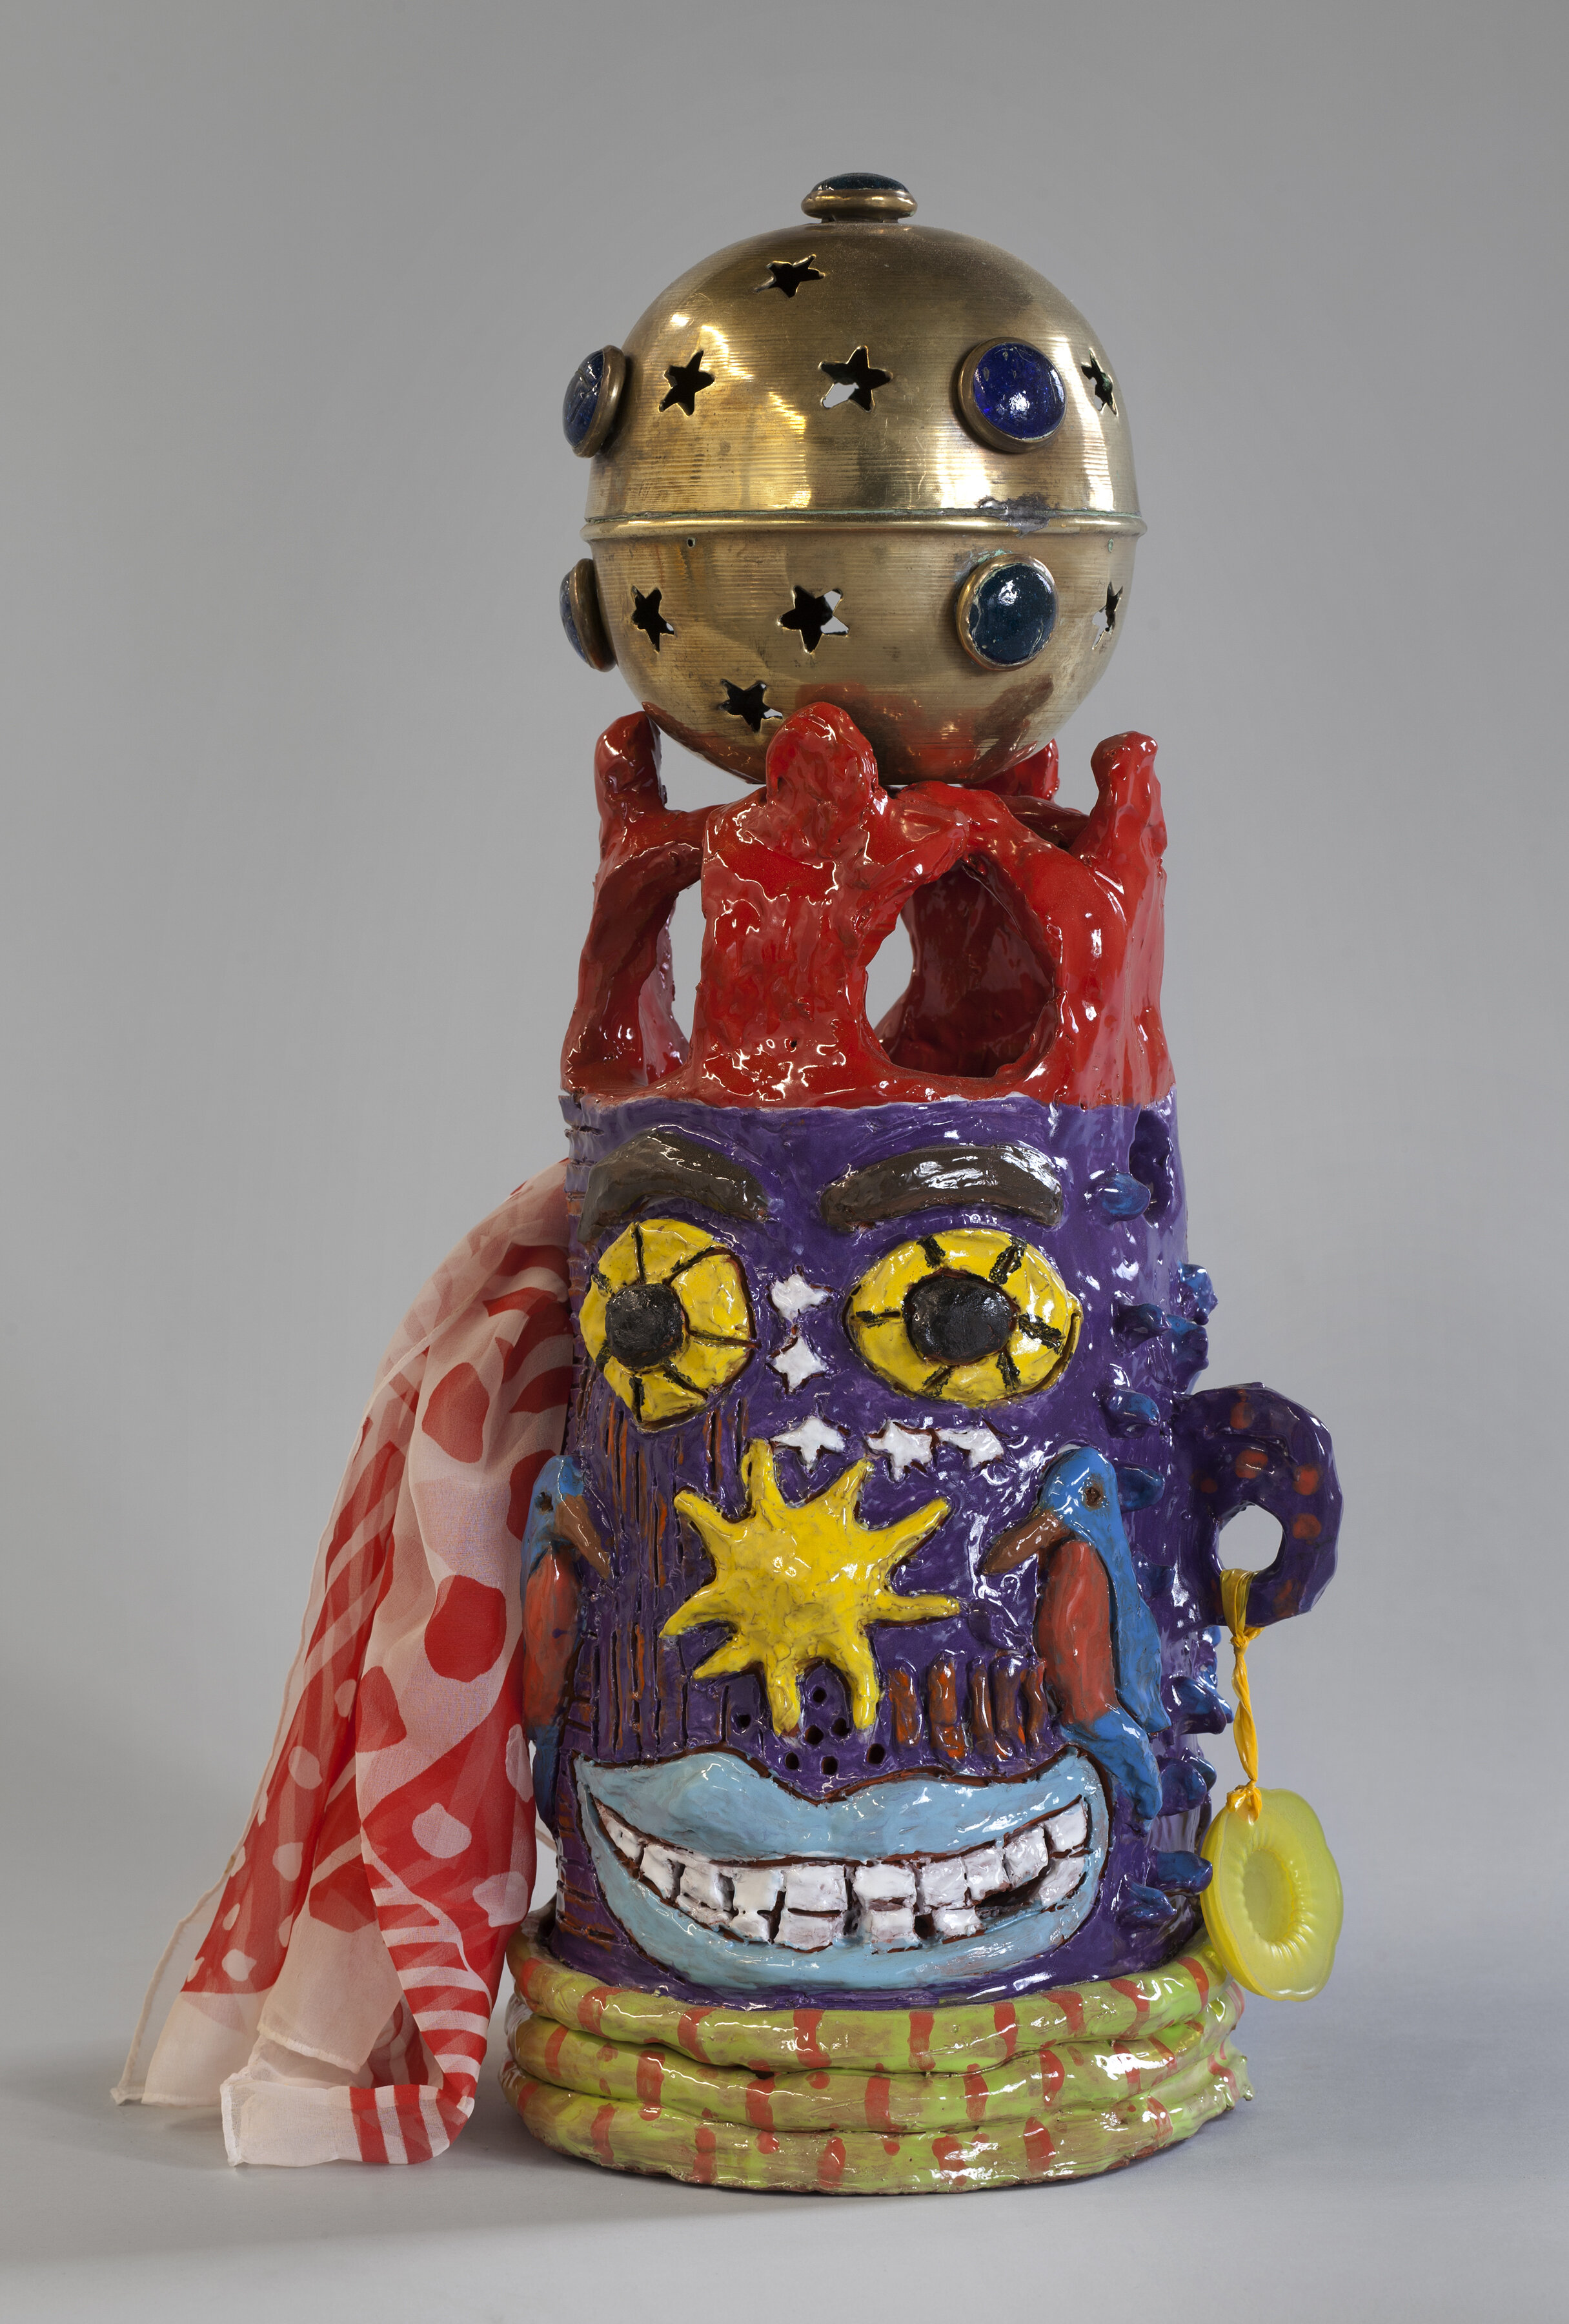   Royal  Figure  Clay, glaze with found objects, fabric and yarn 2021 